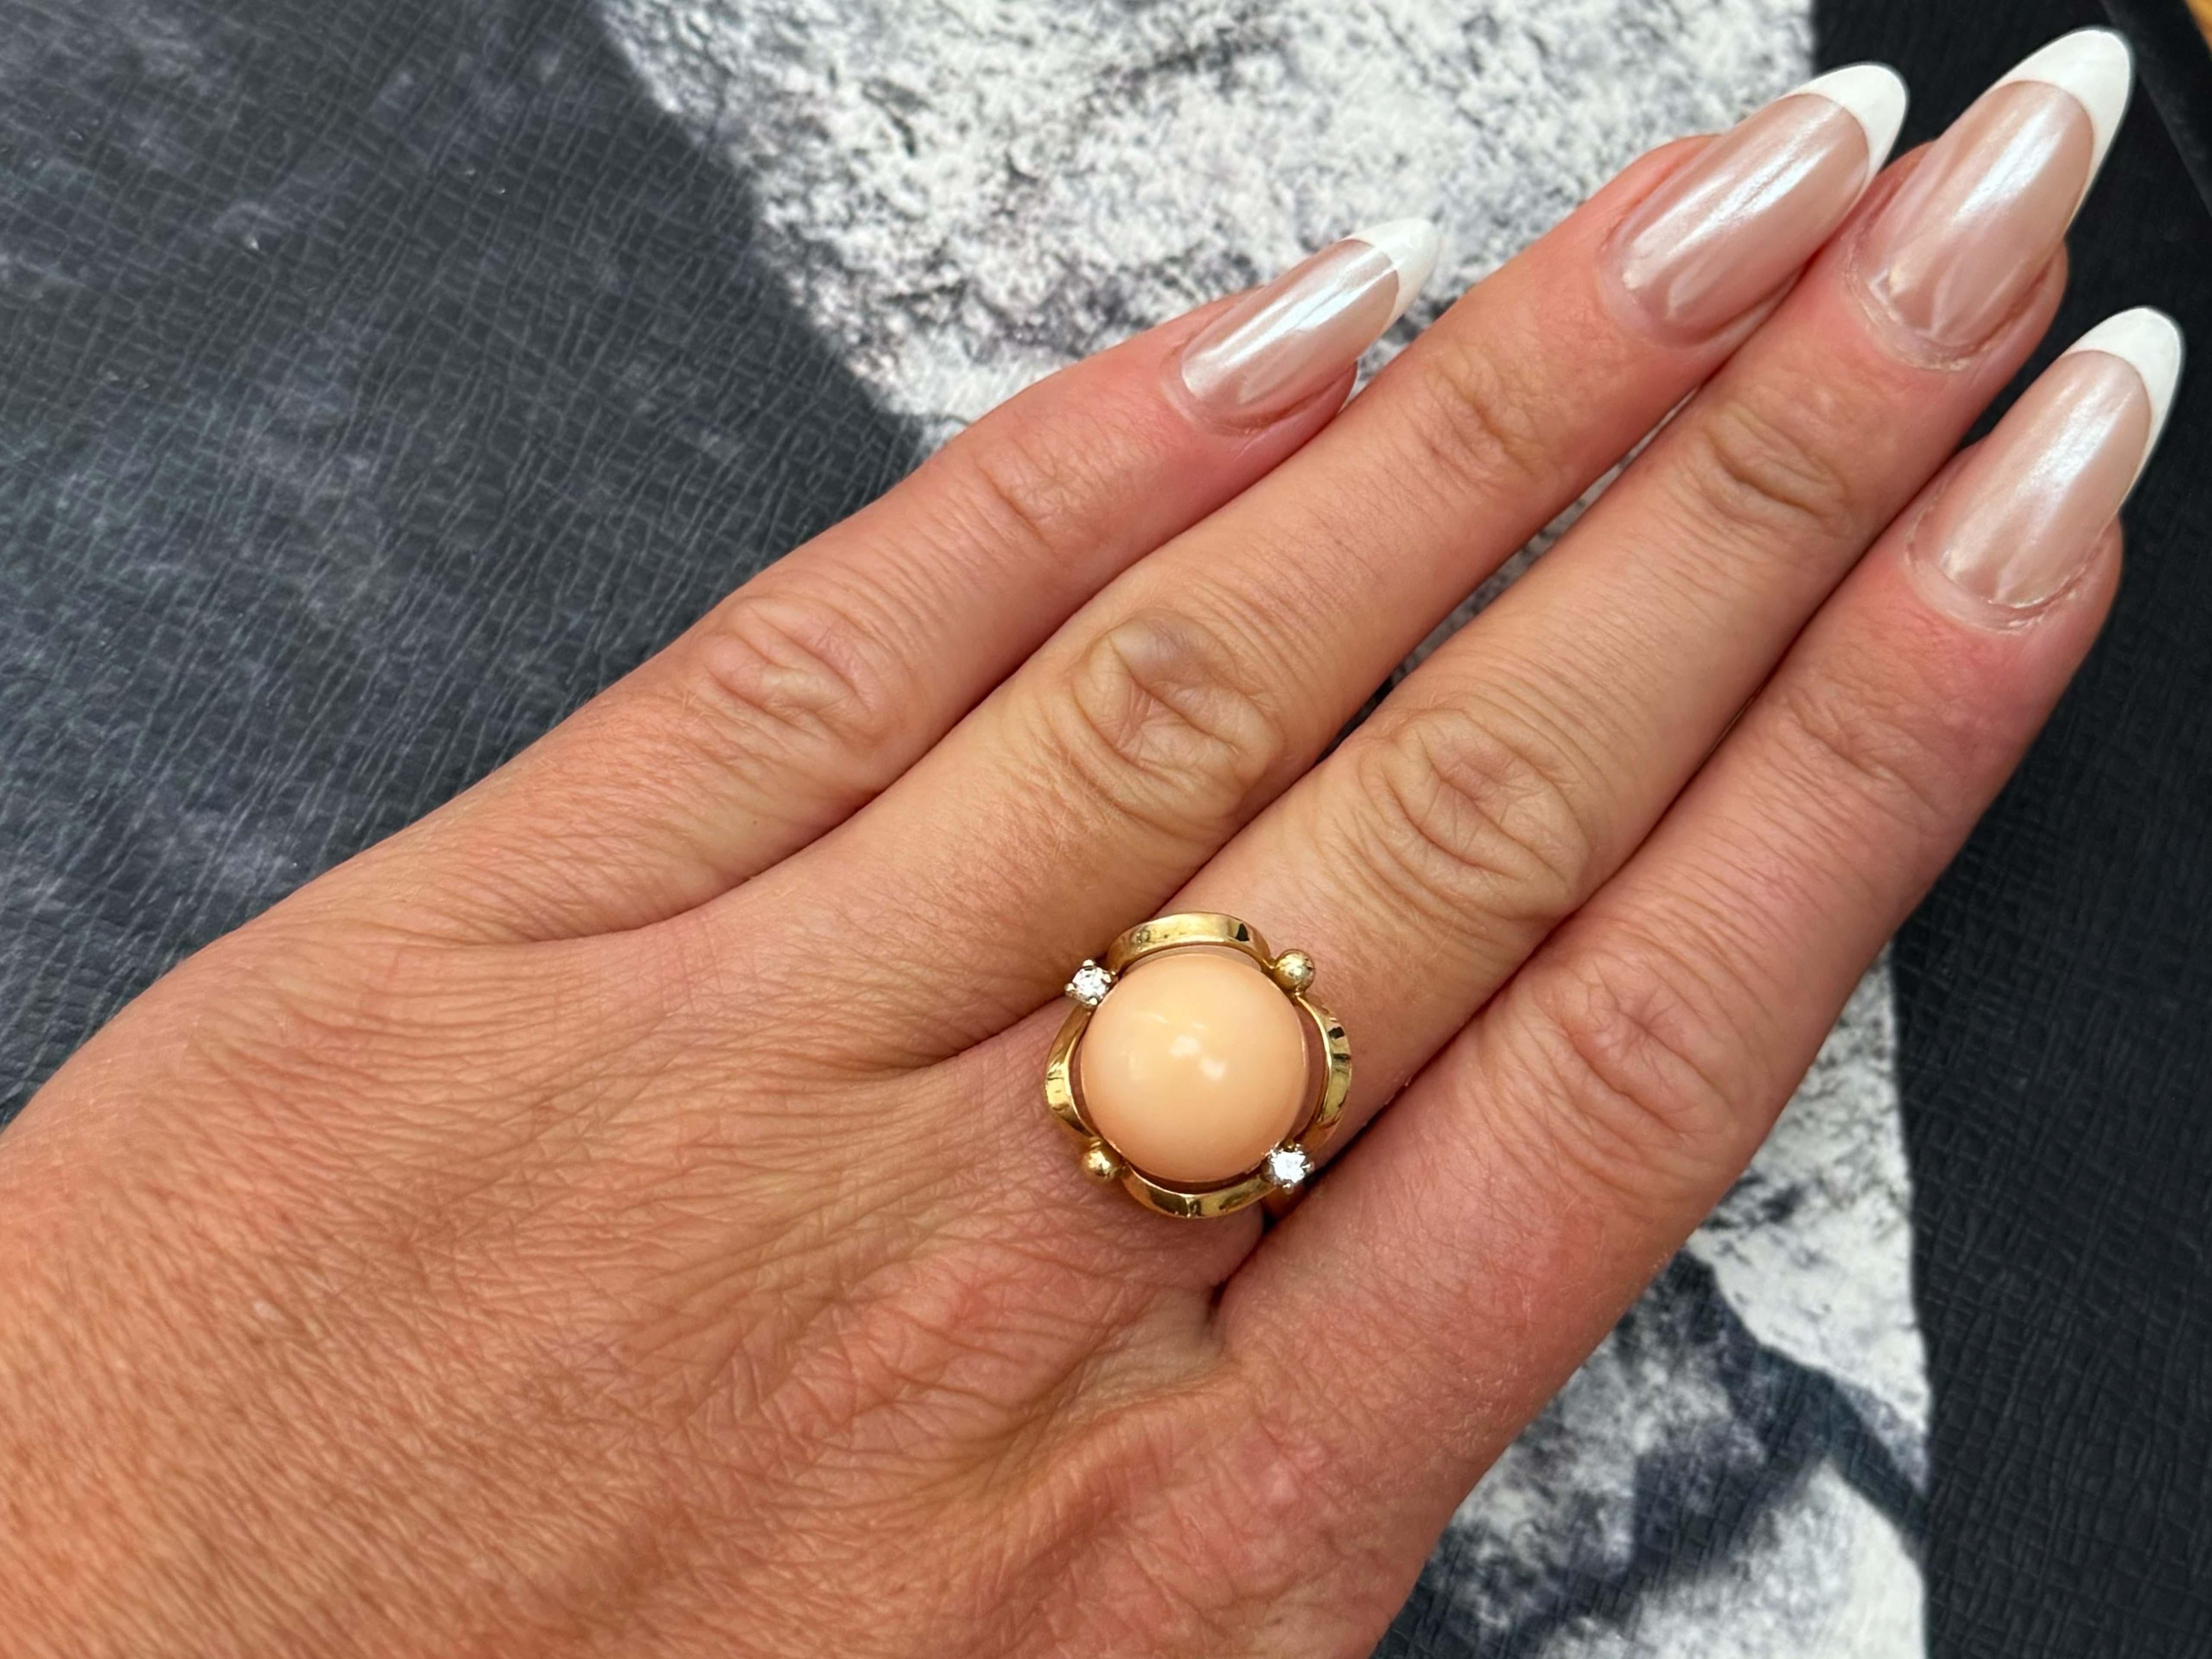 Item Specifications:

Metal: 14K Yellow Gold

Style: Statement Ring

Ring Size: 6.5 (resizing available for a fee)

Total Weight: 6.5 Grams

Gemstone: Angelskin Coral

Sphere Diameter: 13 mm

Diamond Count: 2 round brilliant cut 

Diamond Color: